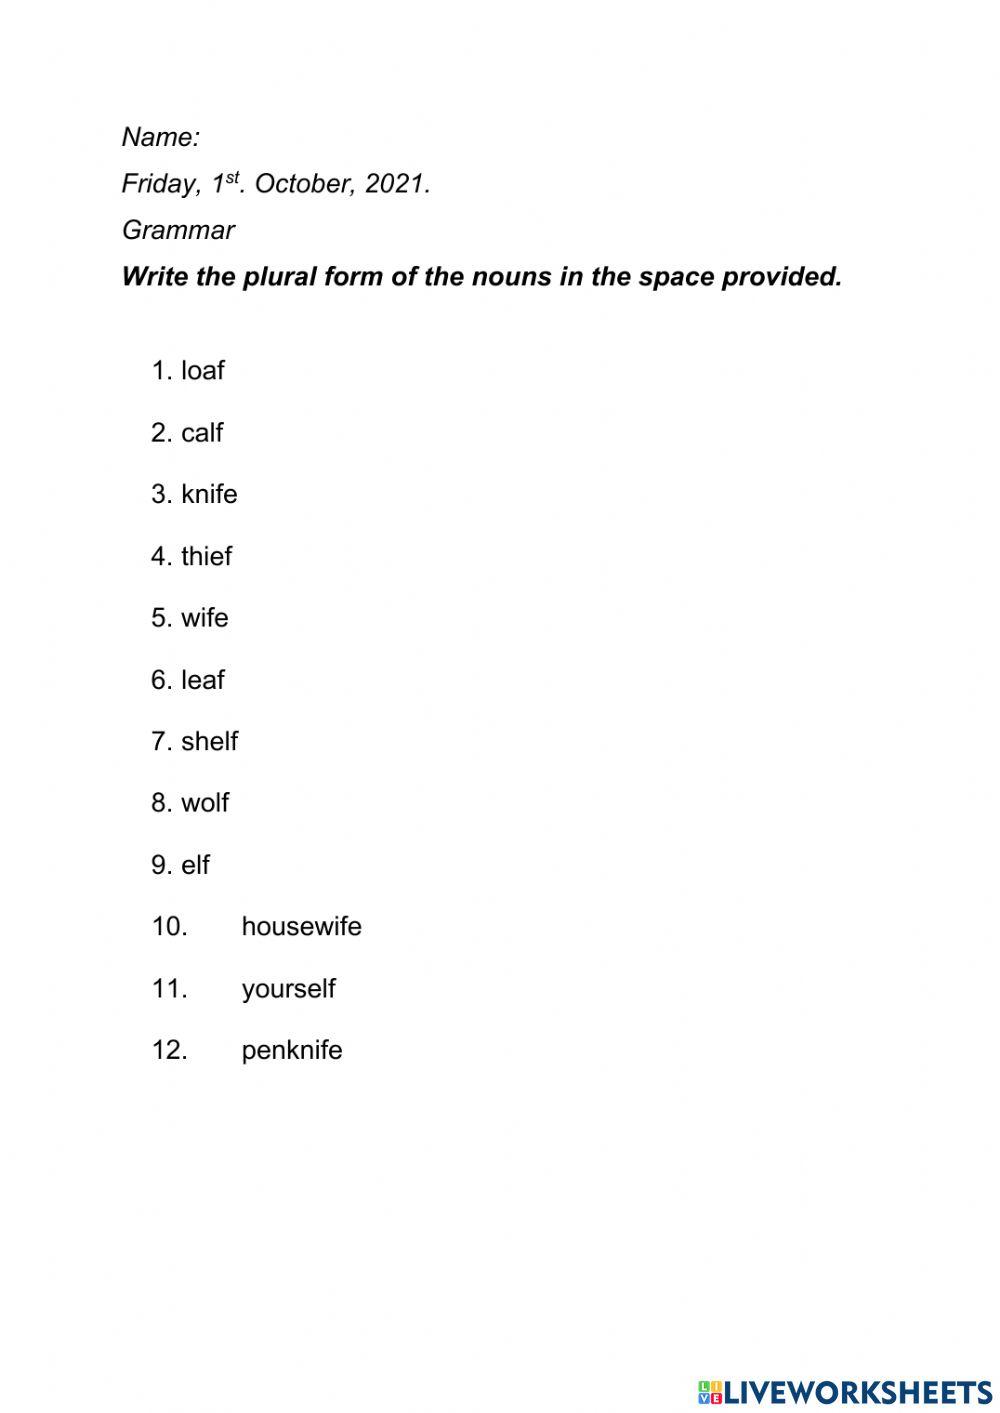 Plural nouns - Word ending 'f' and 'fe'